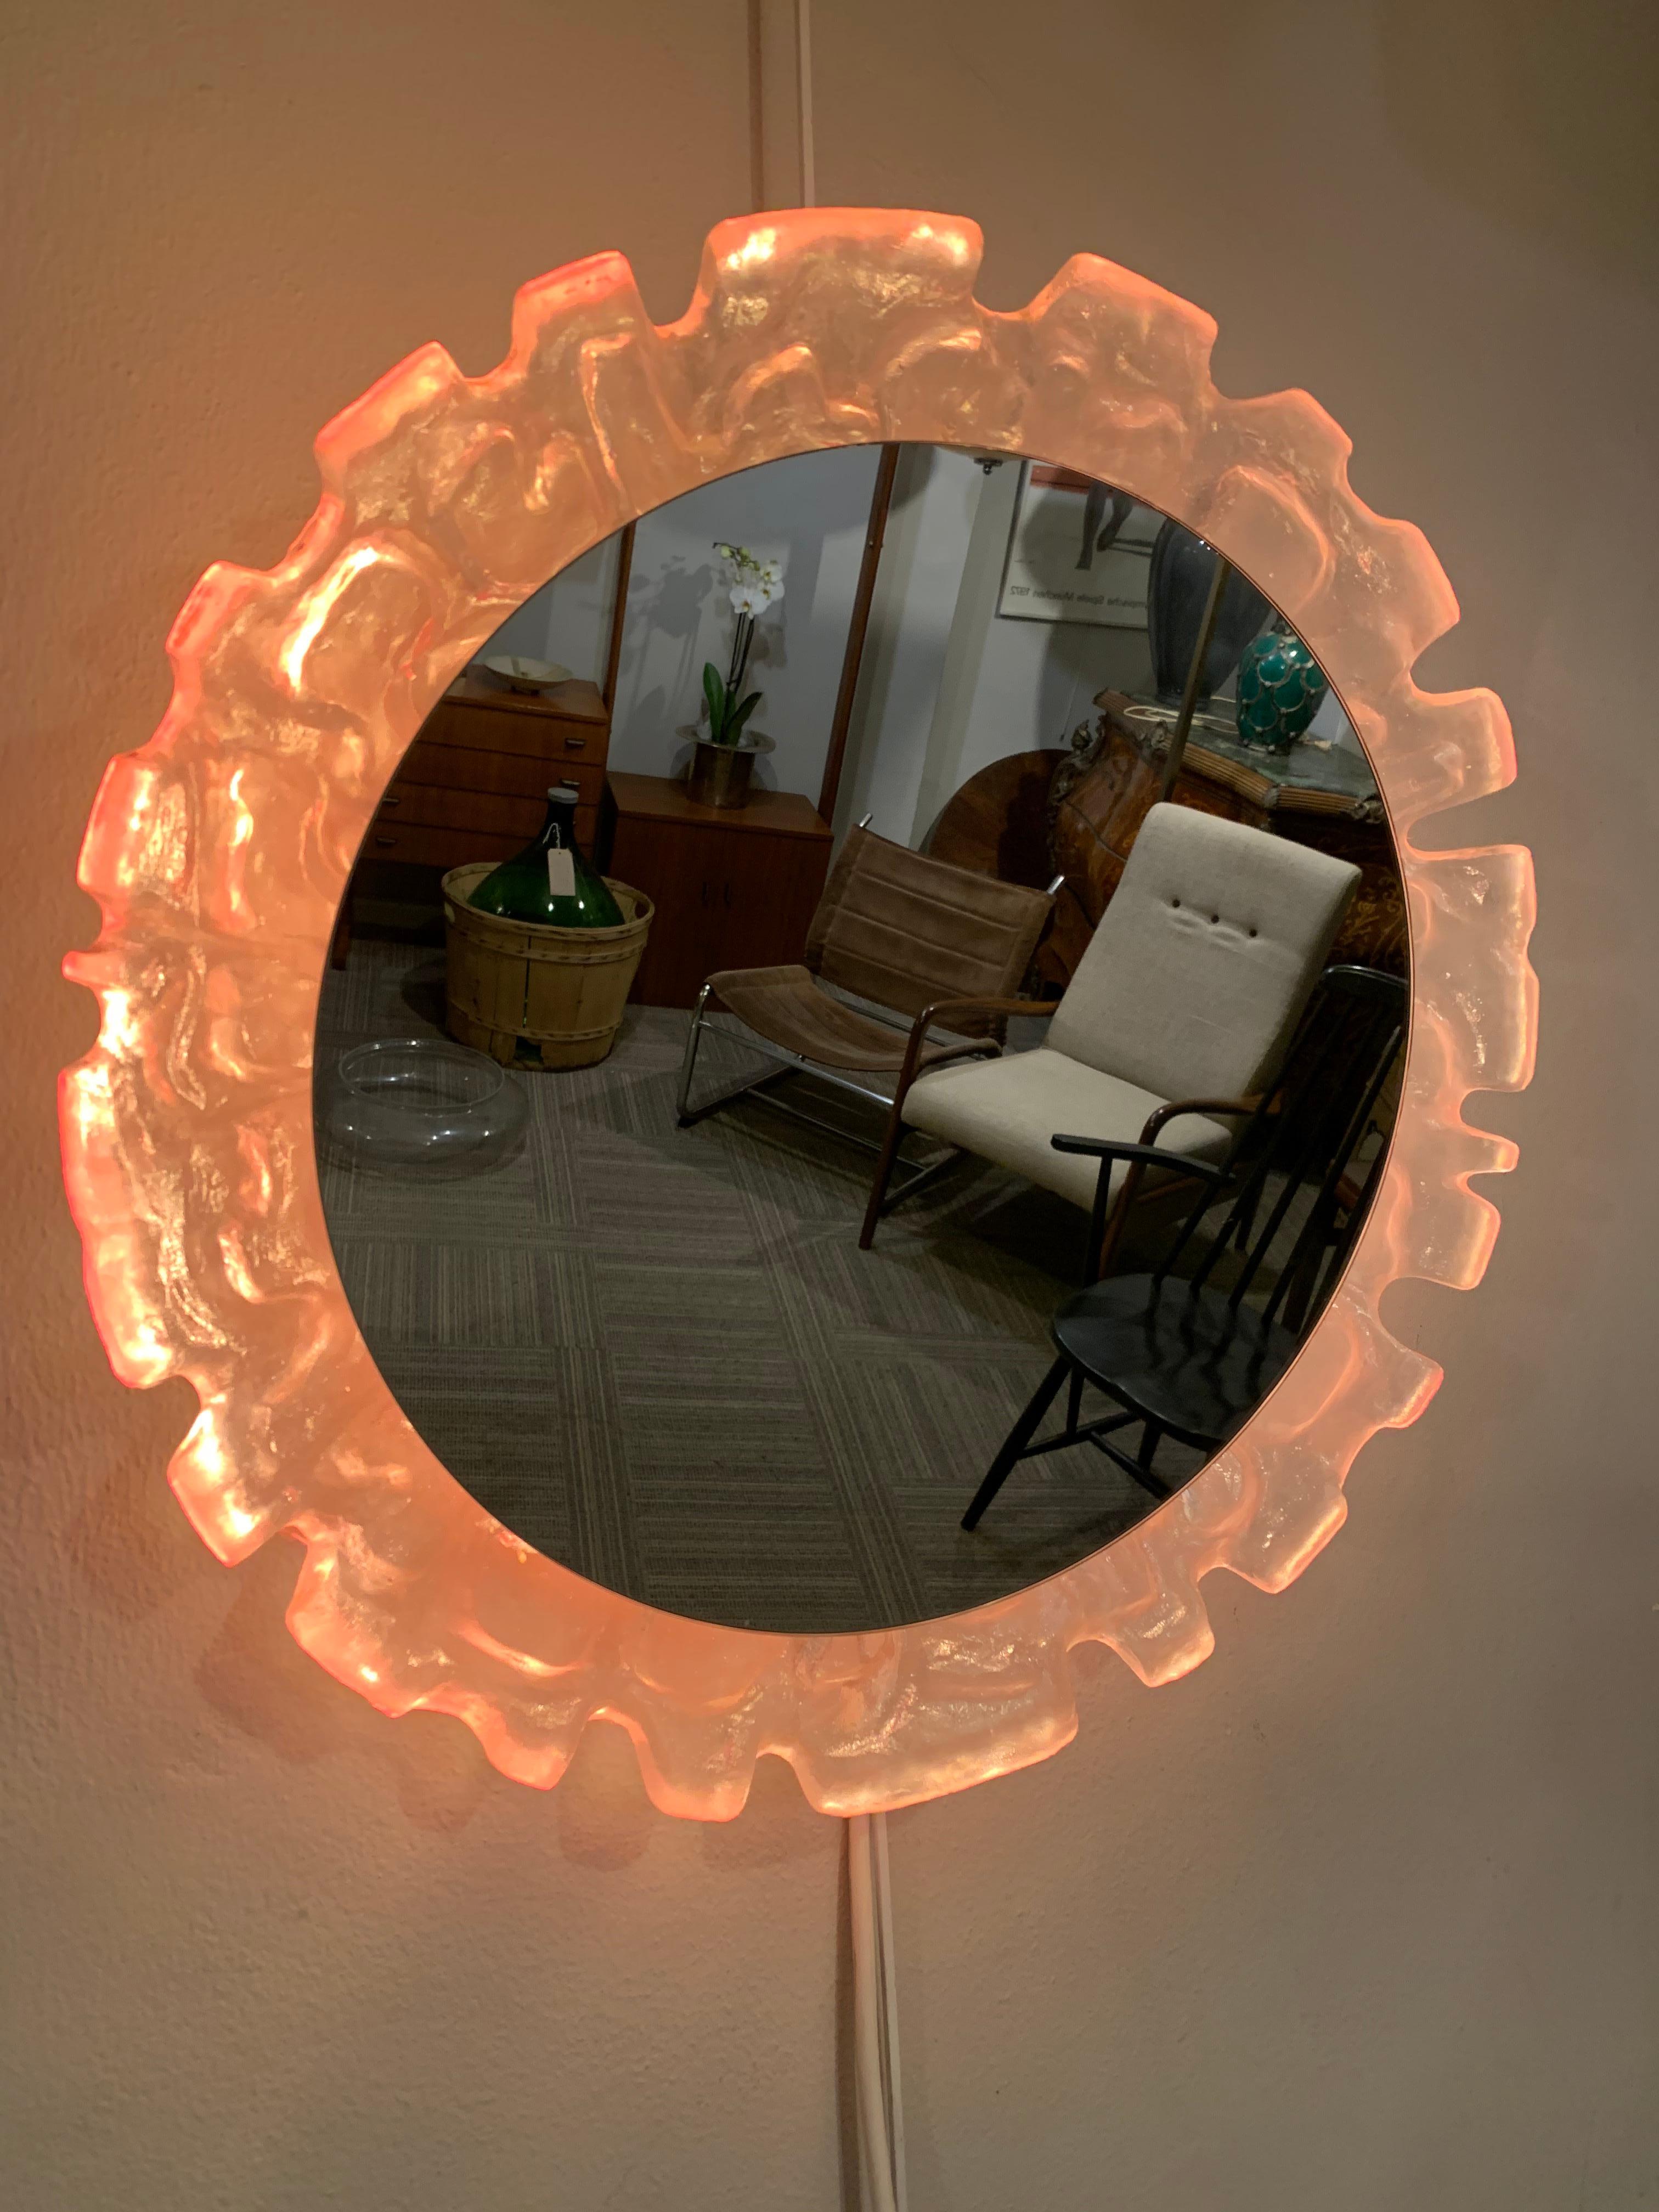 1970s vintage German Lucite illuminated wall mirror manufactured by Erco. The round mirror hangs within an unusual abstract sculpted and textured molded resin surrounded which is backlit. The 4 small E14 screw in 15w pygmy bulbs are surrounded by an